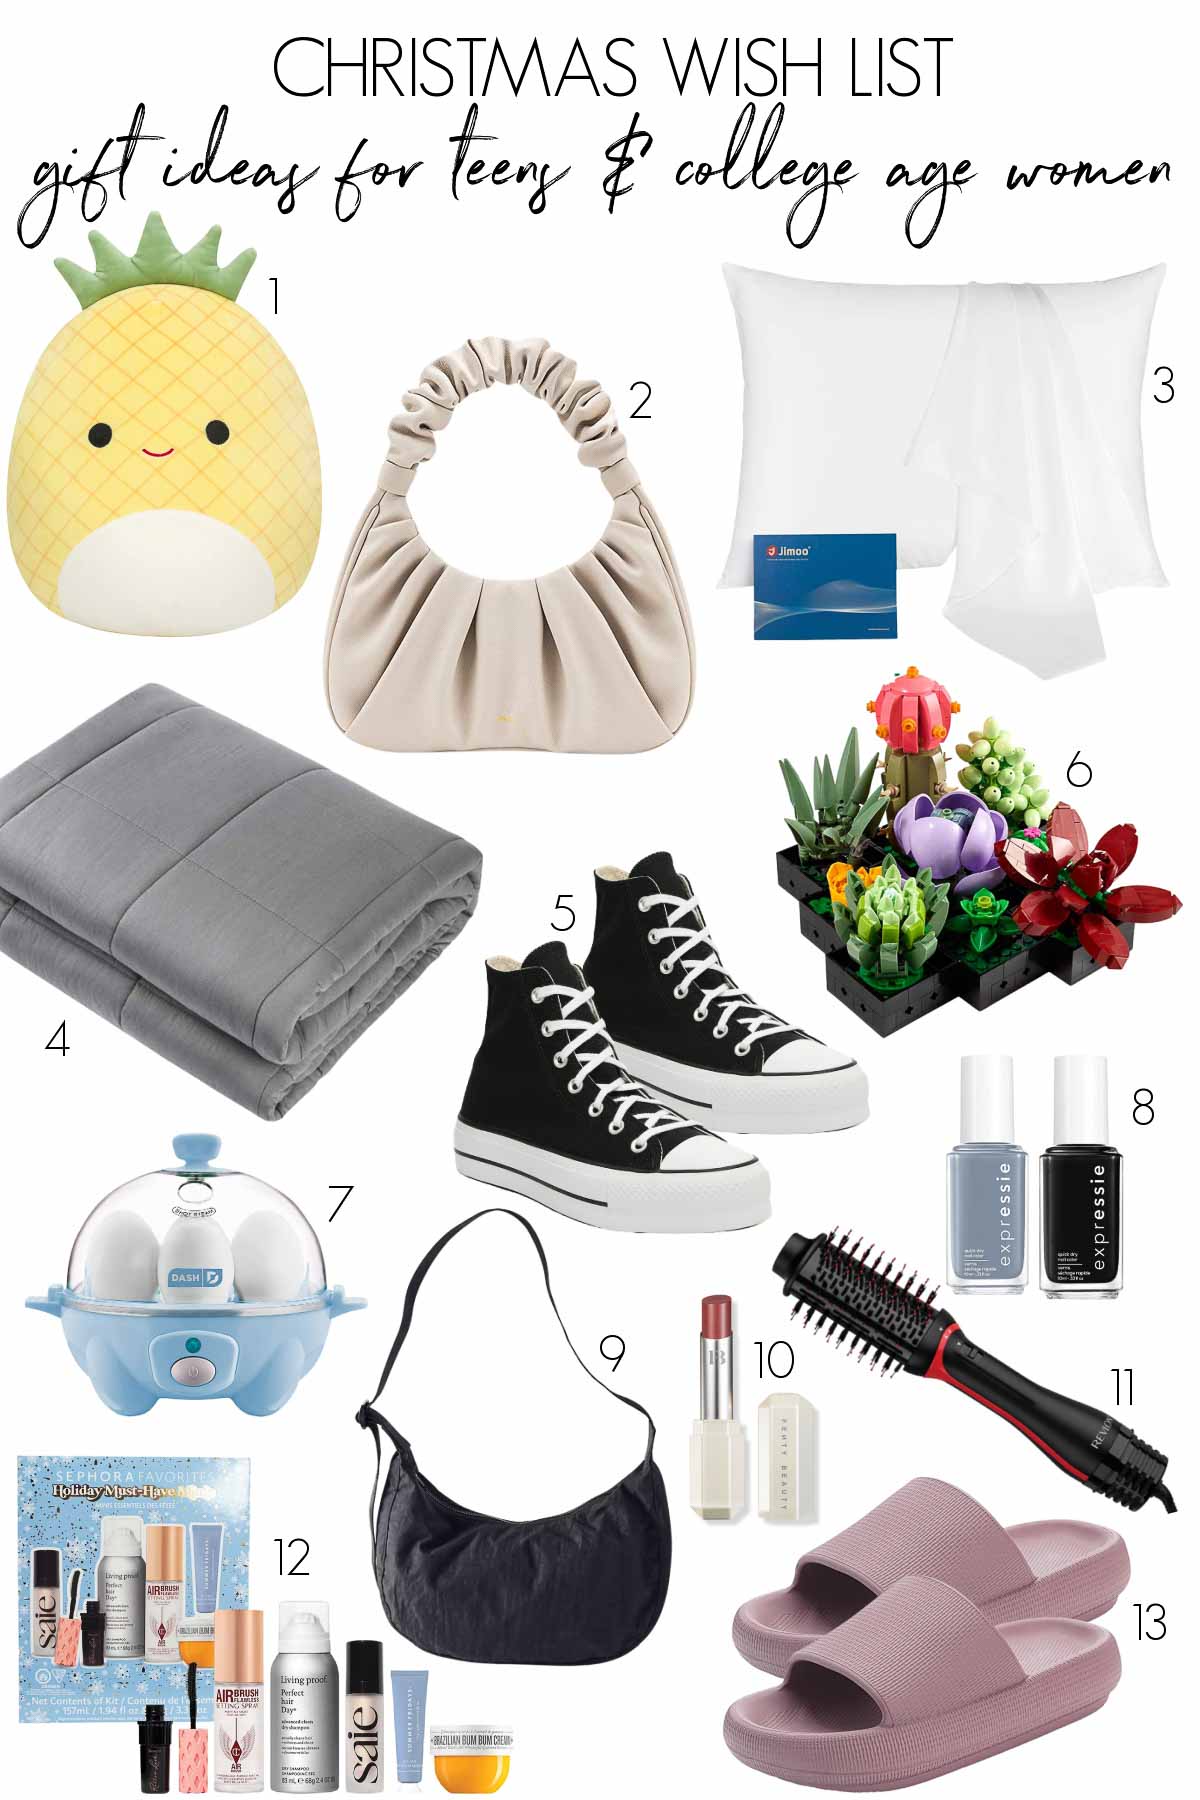 Christmas wish list gift ideas for teens to 20s